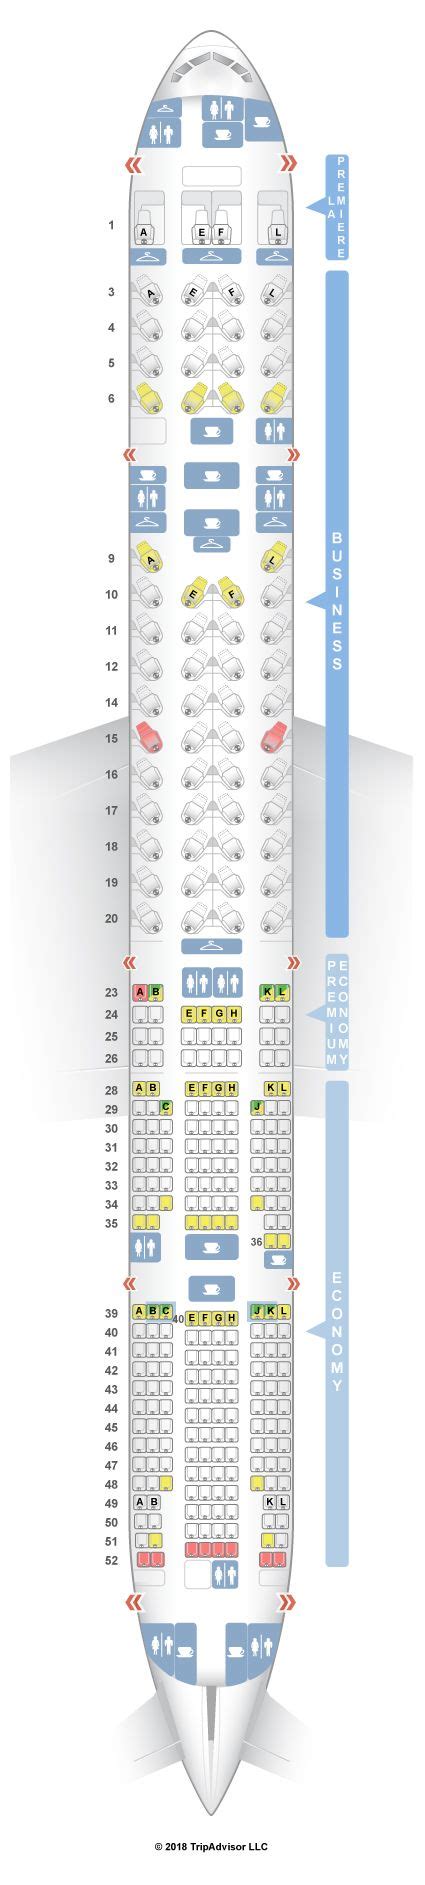 Seat Map And Seating Chart Boeing Er Air France Four Class V Hot Sex Picture